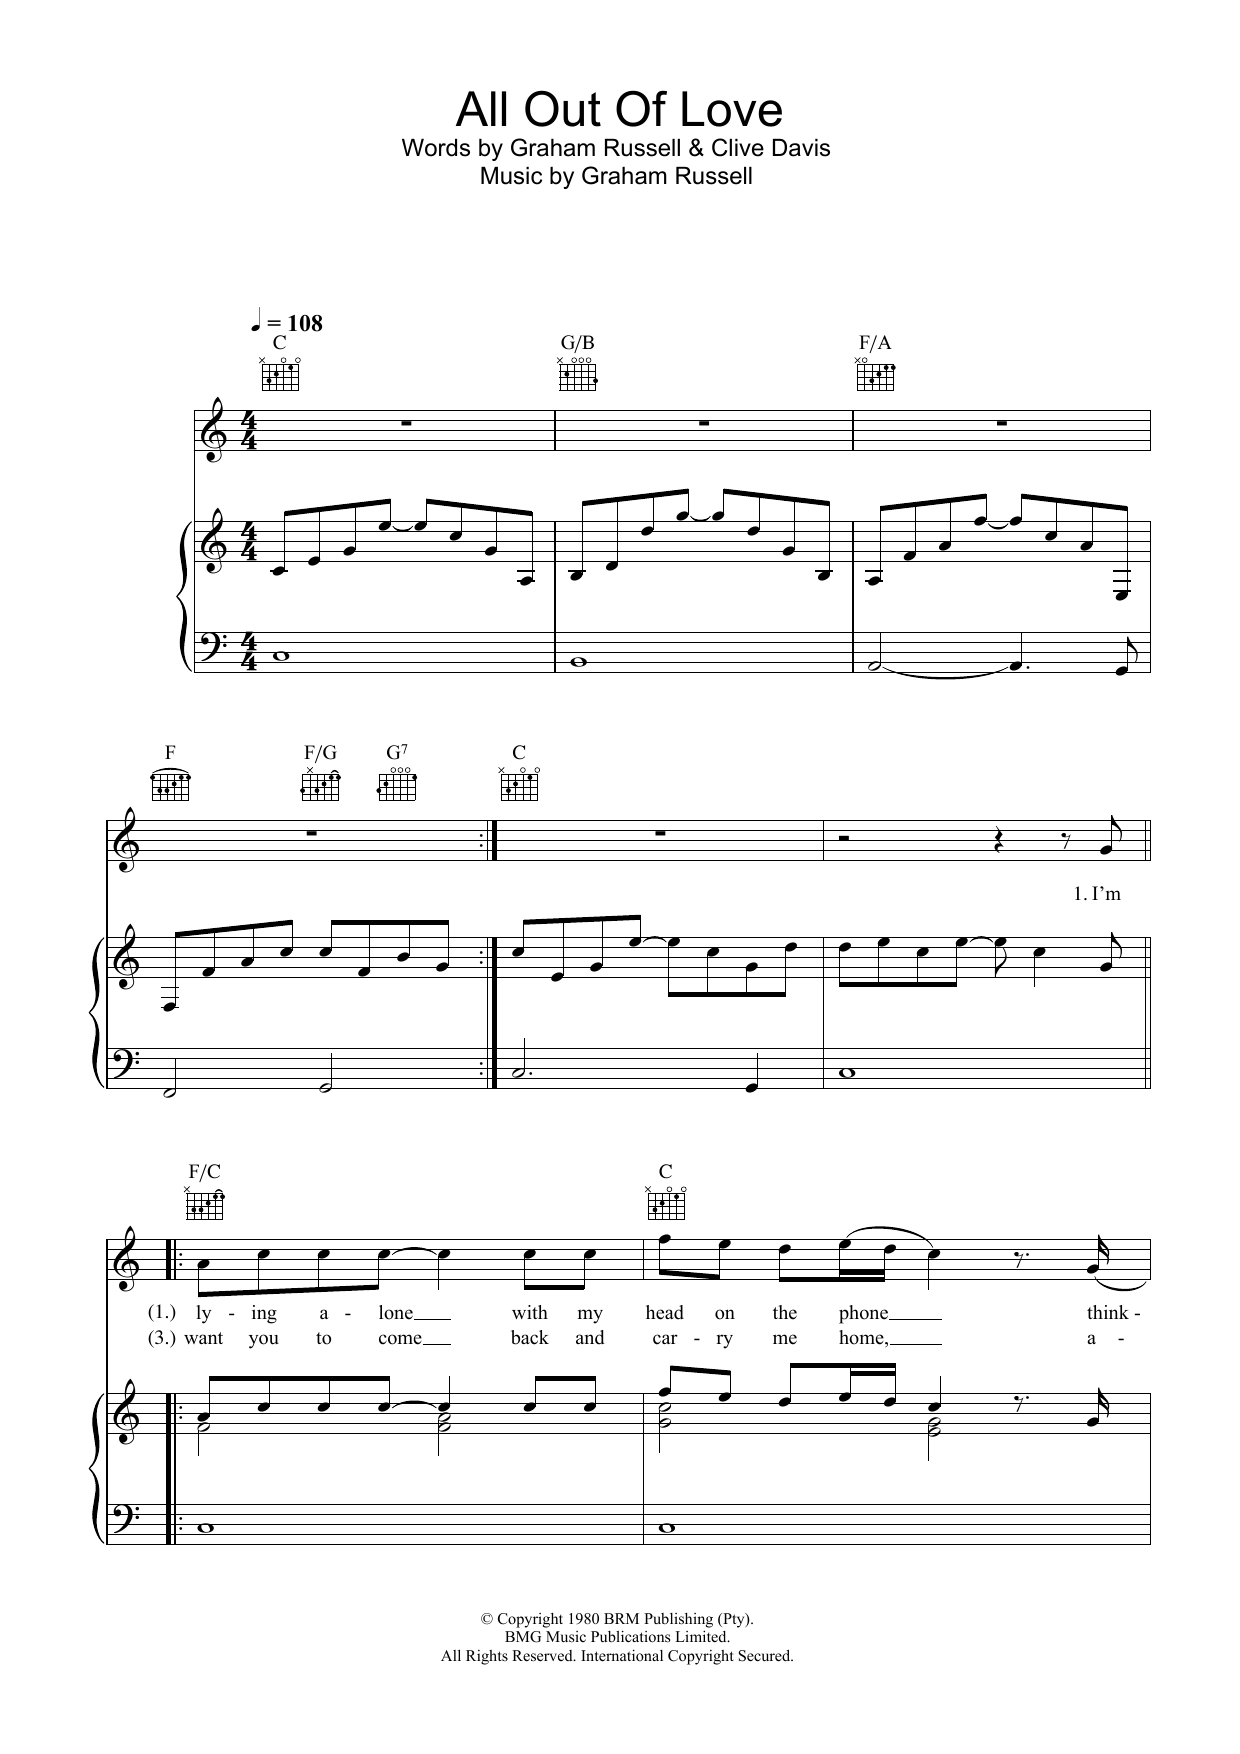 Air Supply All Out Of Love sheet music notes printable PDF score